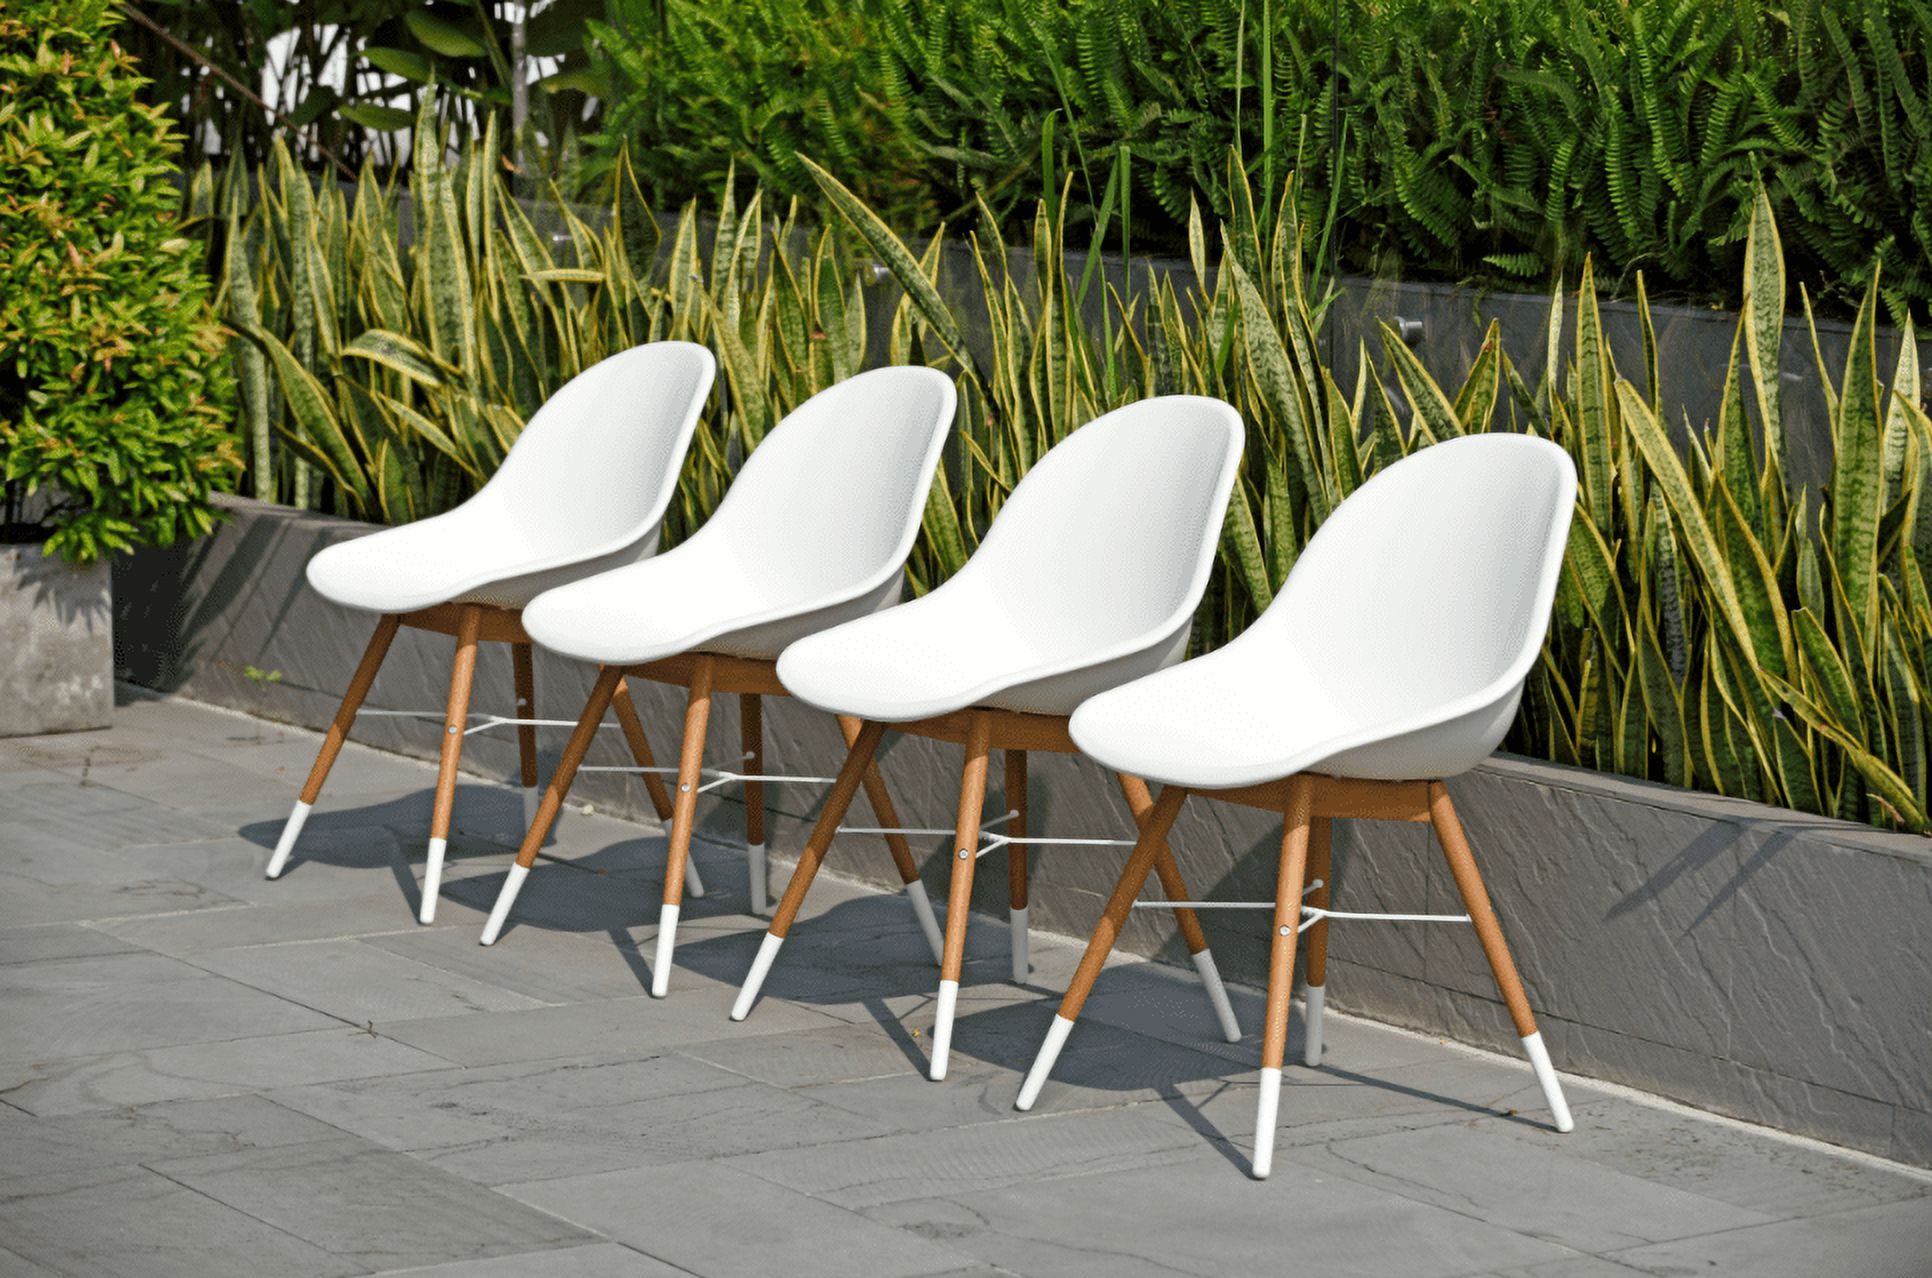 Amazonia Palermo Teak Finish & Resin Patio Chairs, Set of 4, Ideal for Outdoors - image 1 of 6